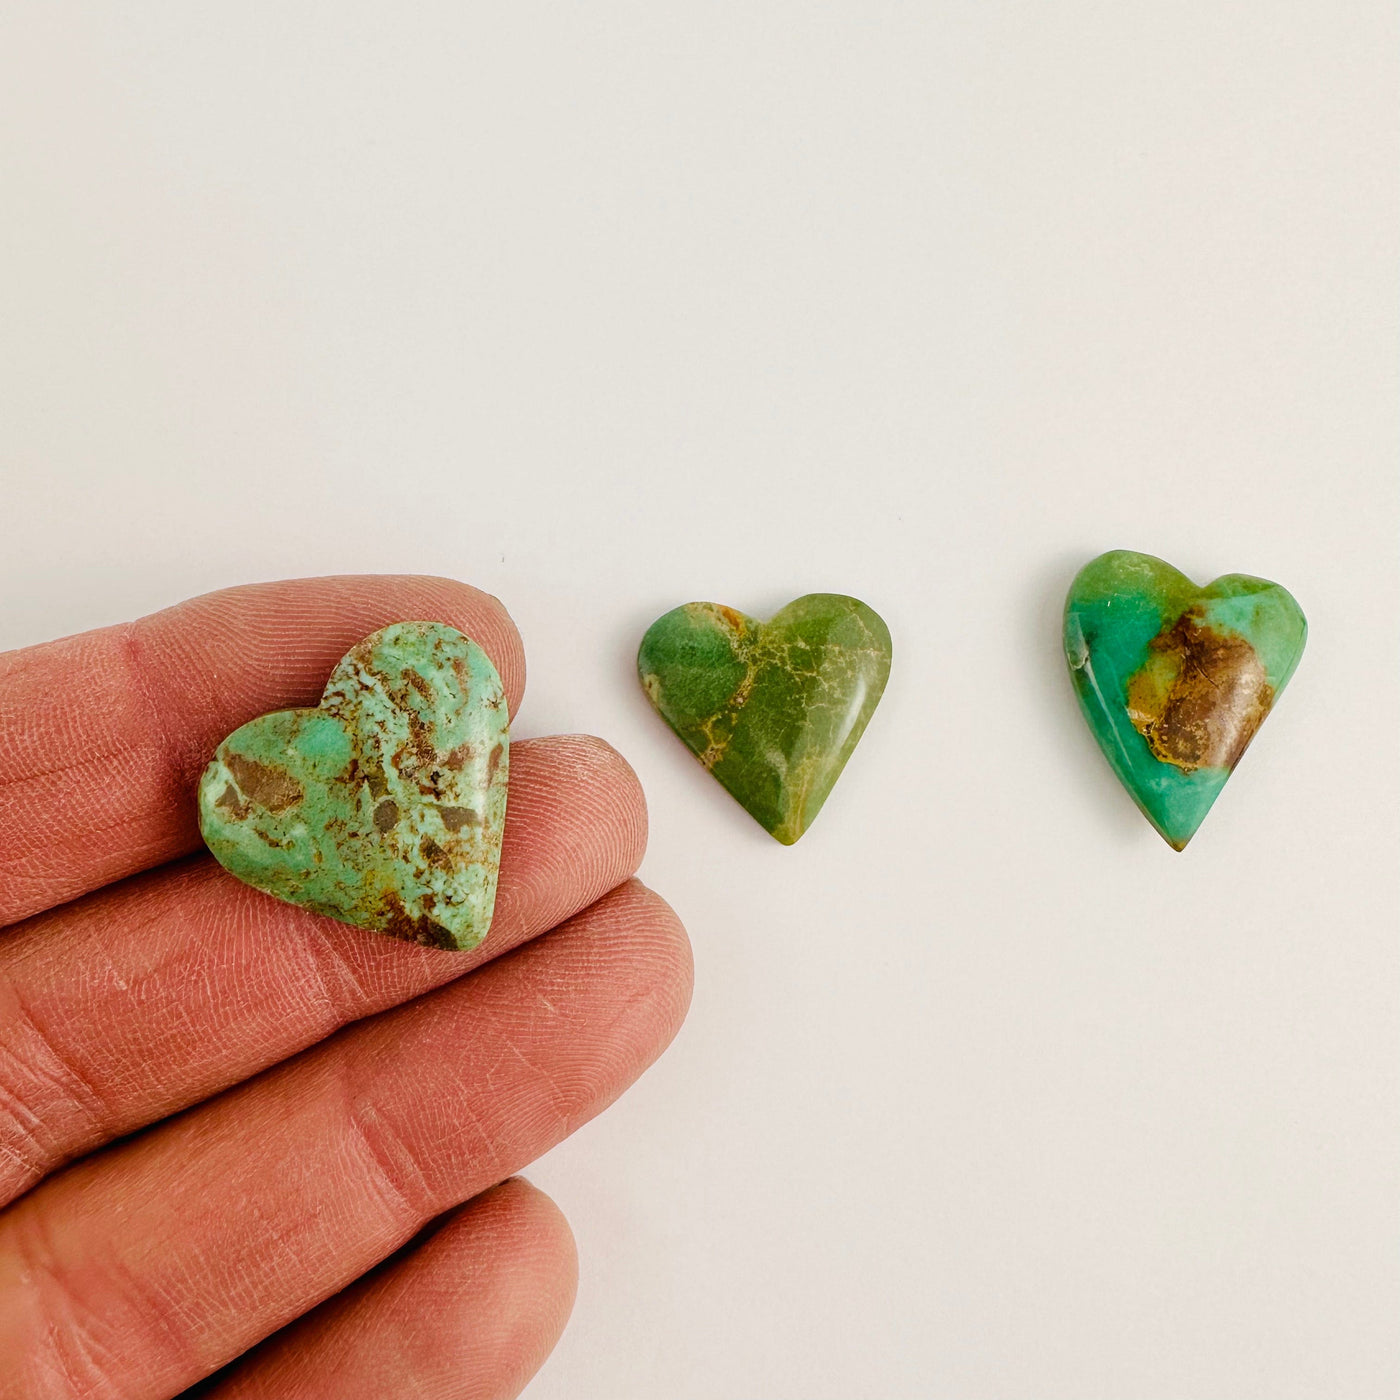 3 Turquoise Heart Cabochons, with 1 in a hand for size reference